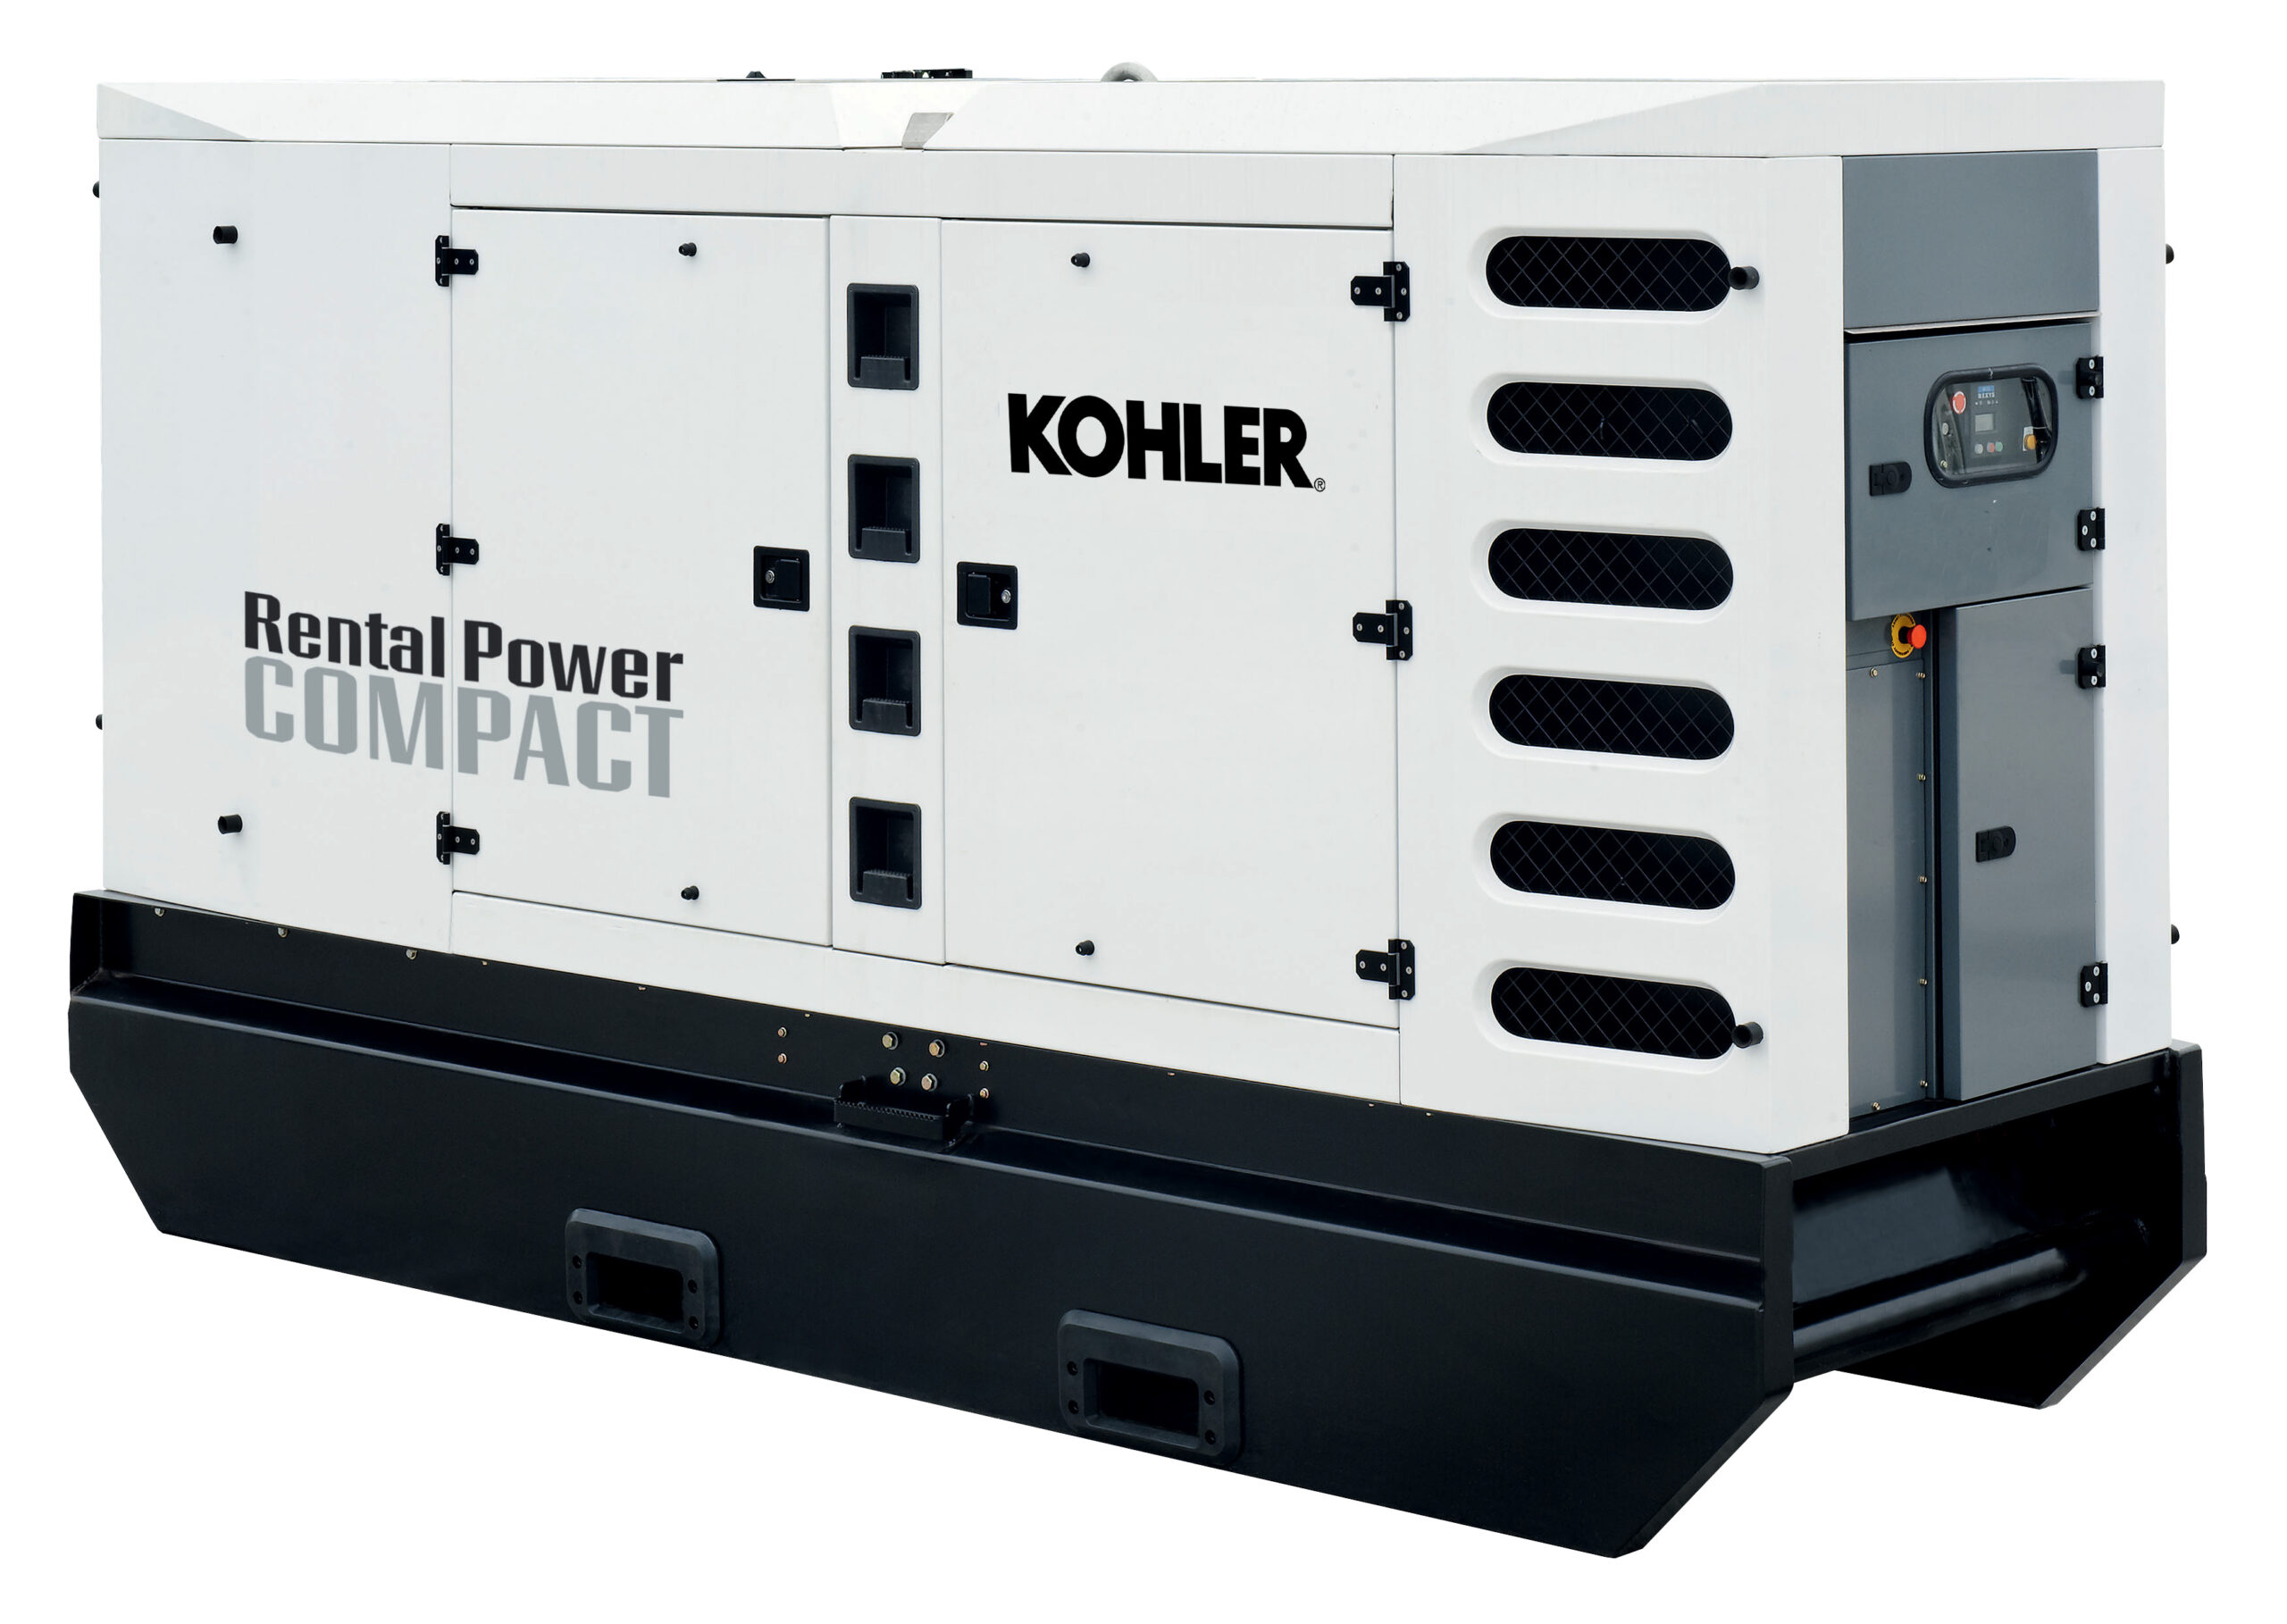 R110C3 powergen generator for rentals and events